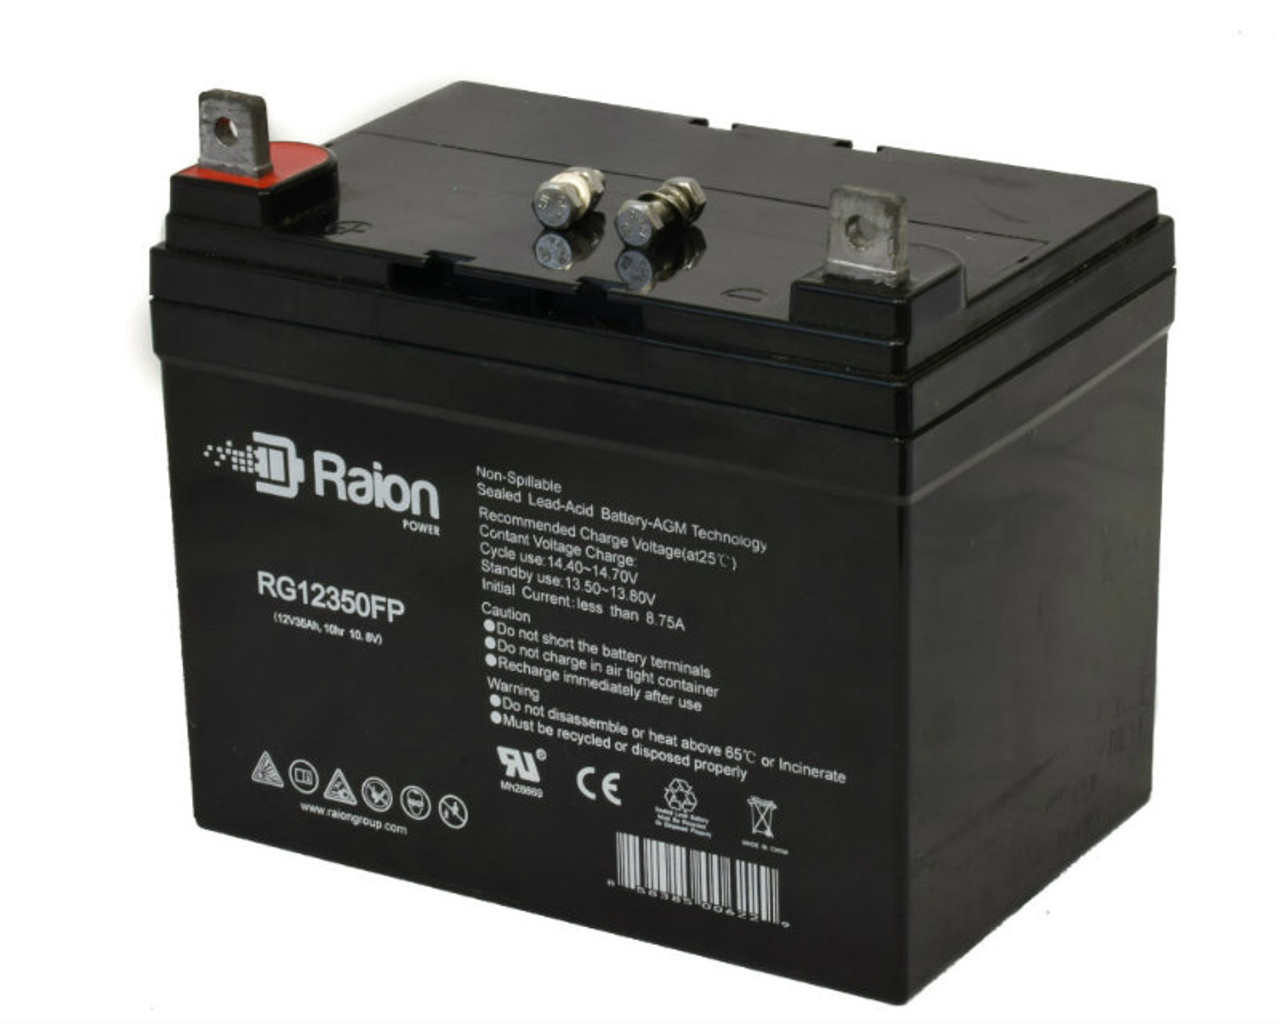 Raion Power Replacement 12V 35Ah RG12350FP Mobility Scooter Battery for Bruno CUB 30